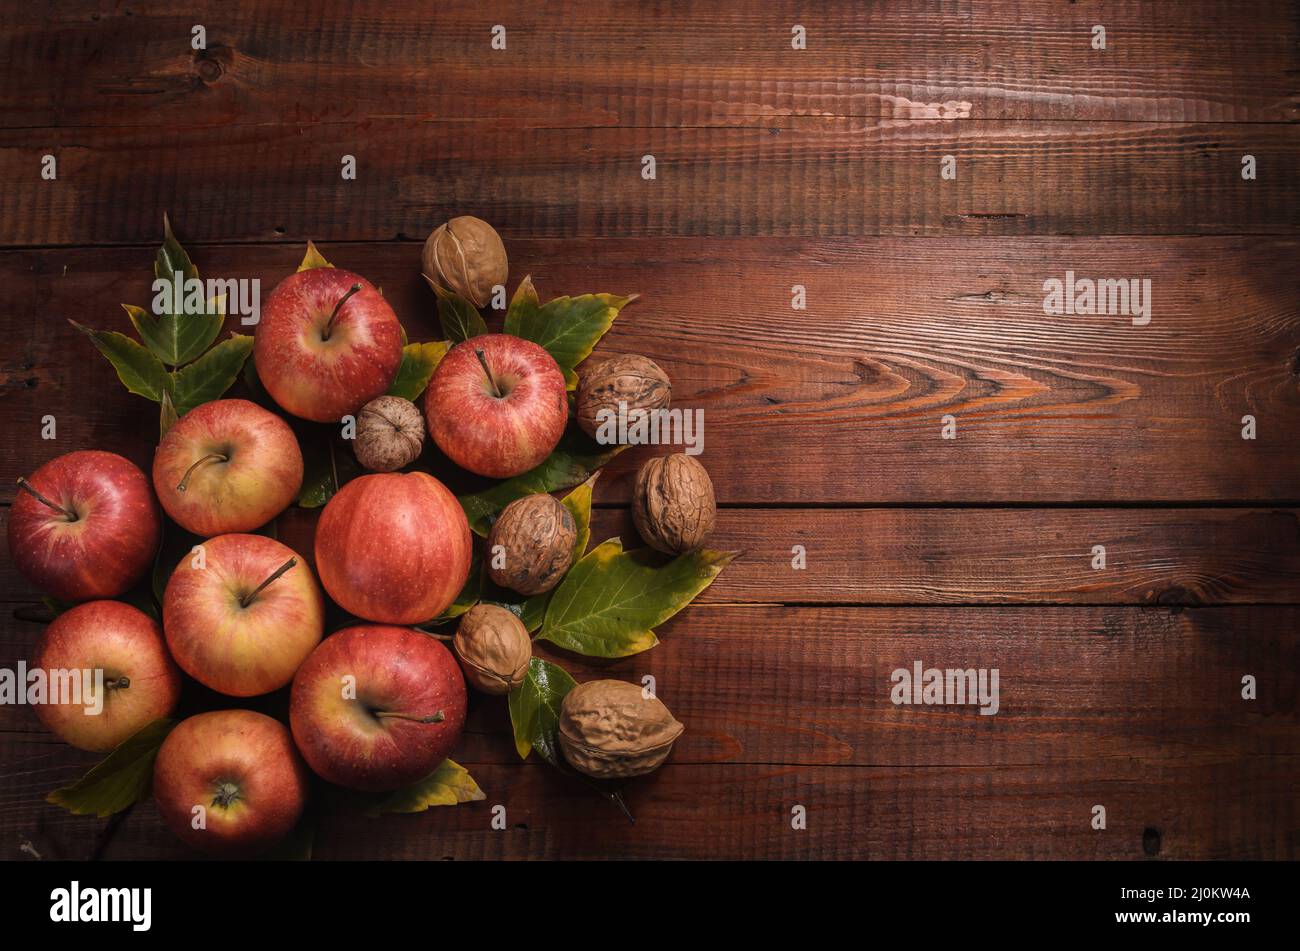 Apples on a dark wooden background in a rustic style Stock Photo